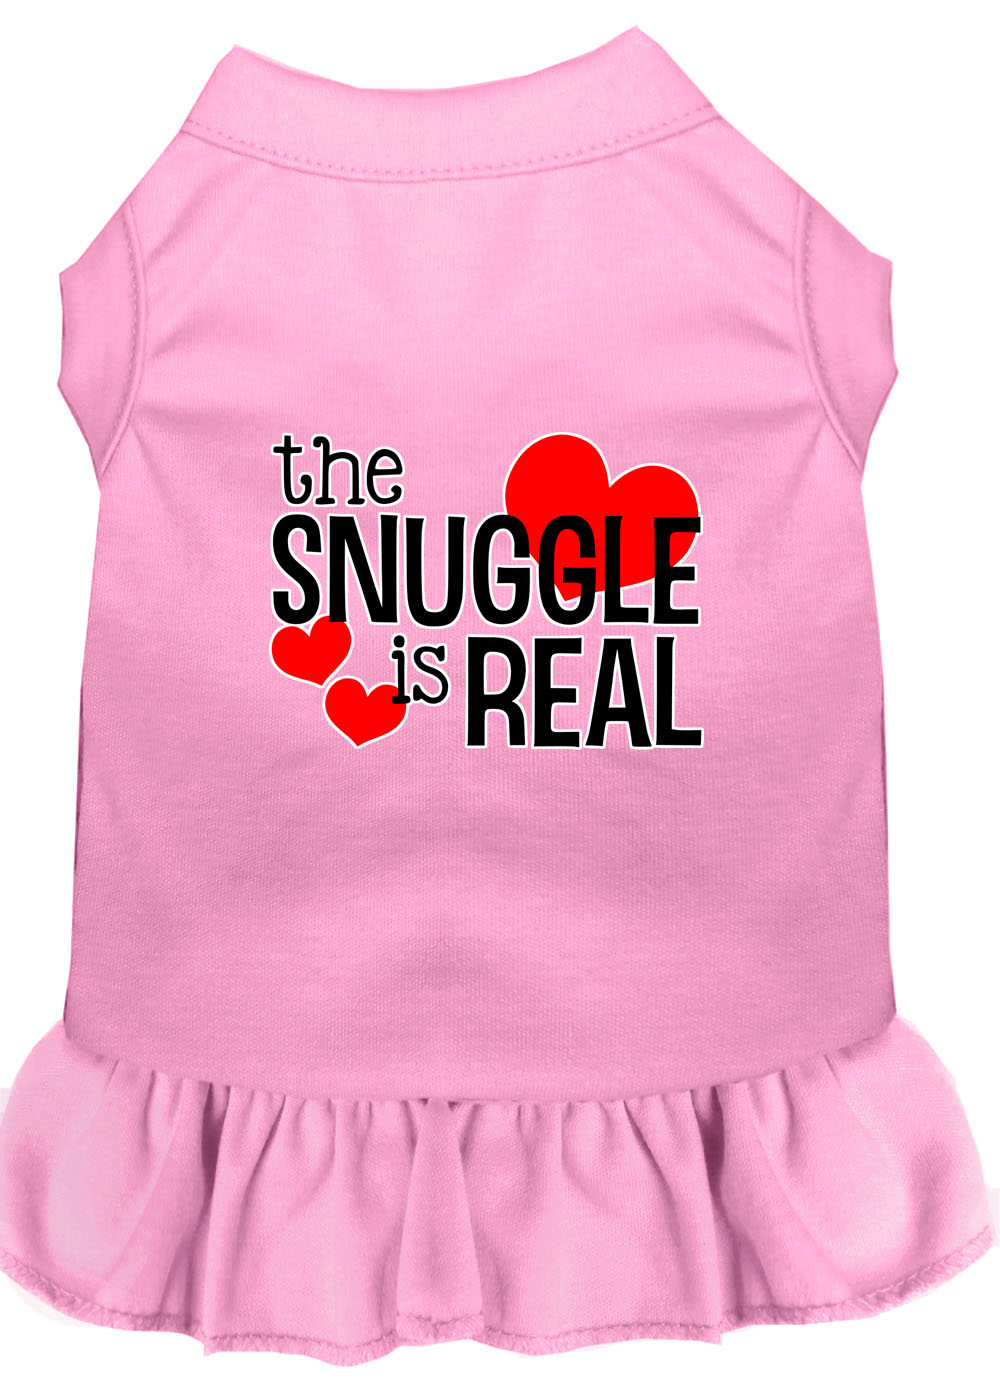 The Snuggle is Real Screen Print Dog Dress Light Pink XS